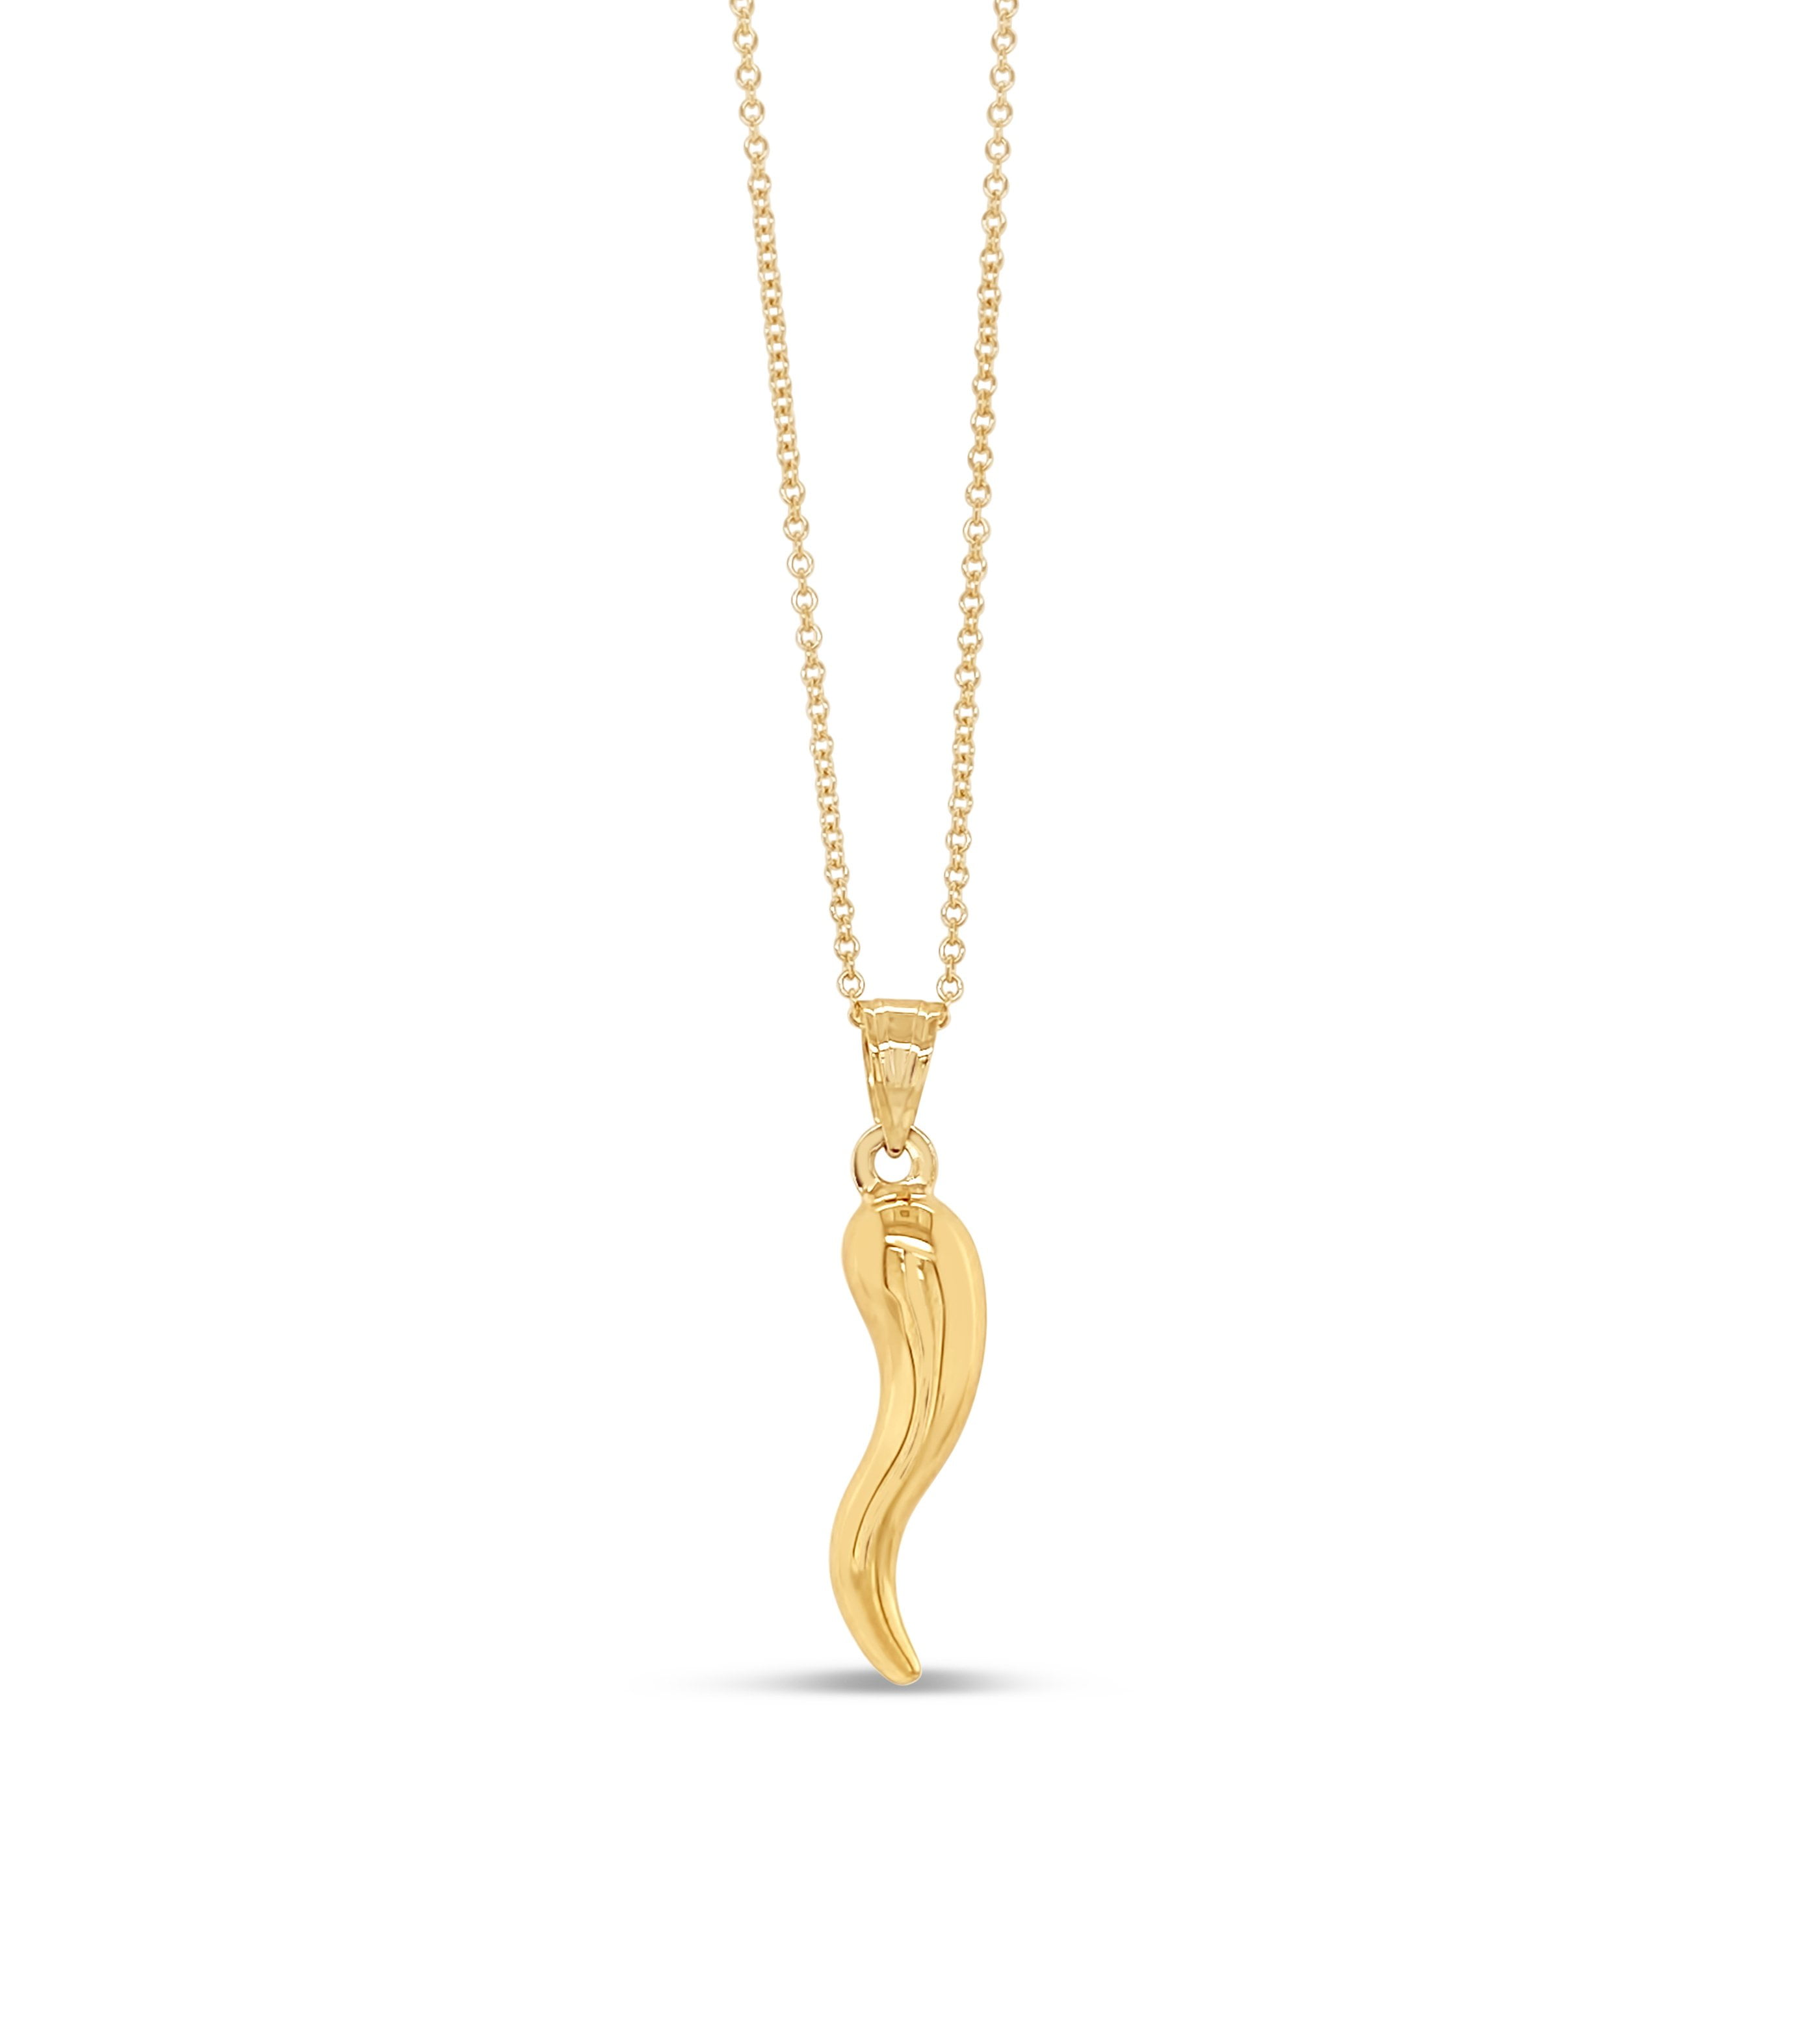 The World Jewelry Center 14k Yellow Gold Twisted Cornicello Italian Horn Pendant with 1.2mm Cable Chain Necklace 